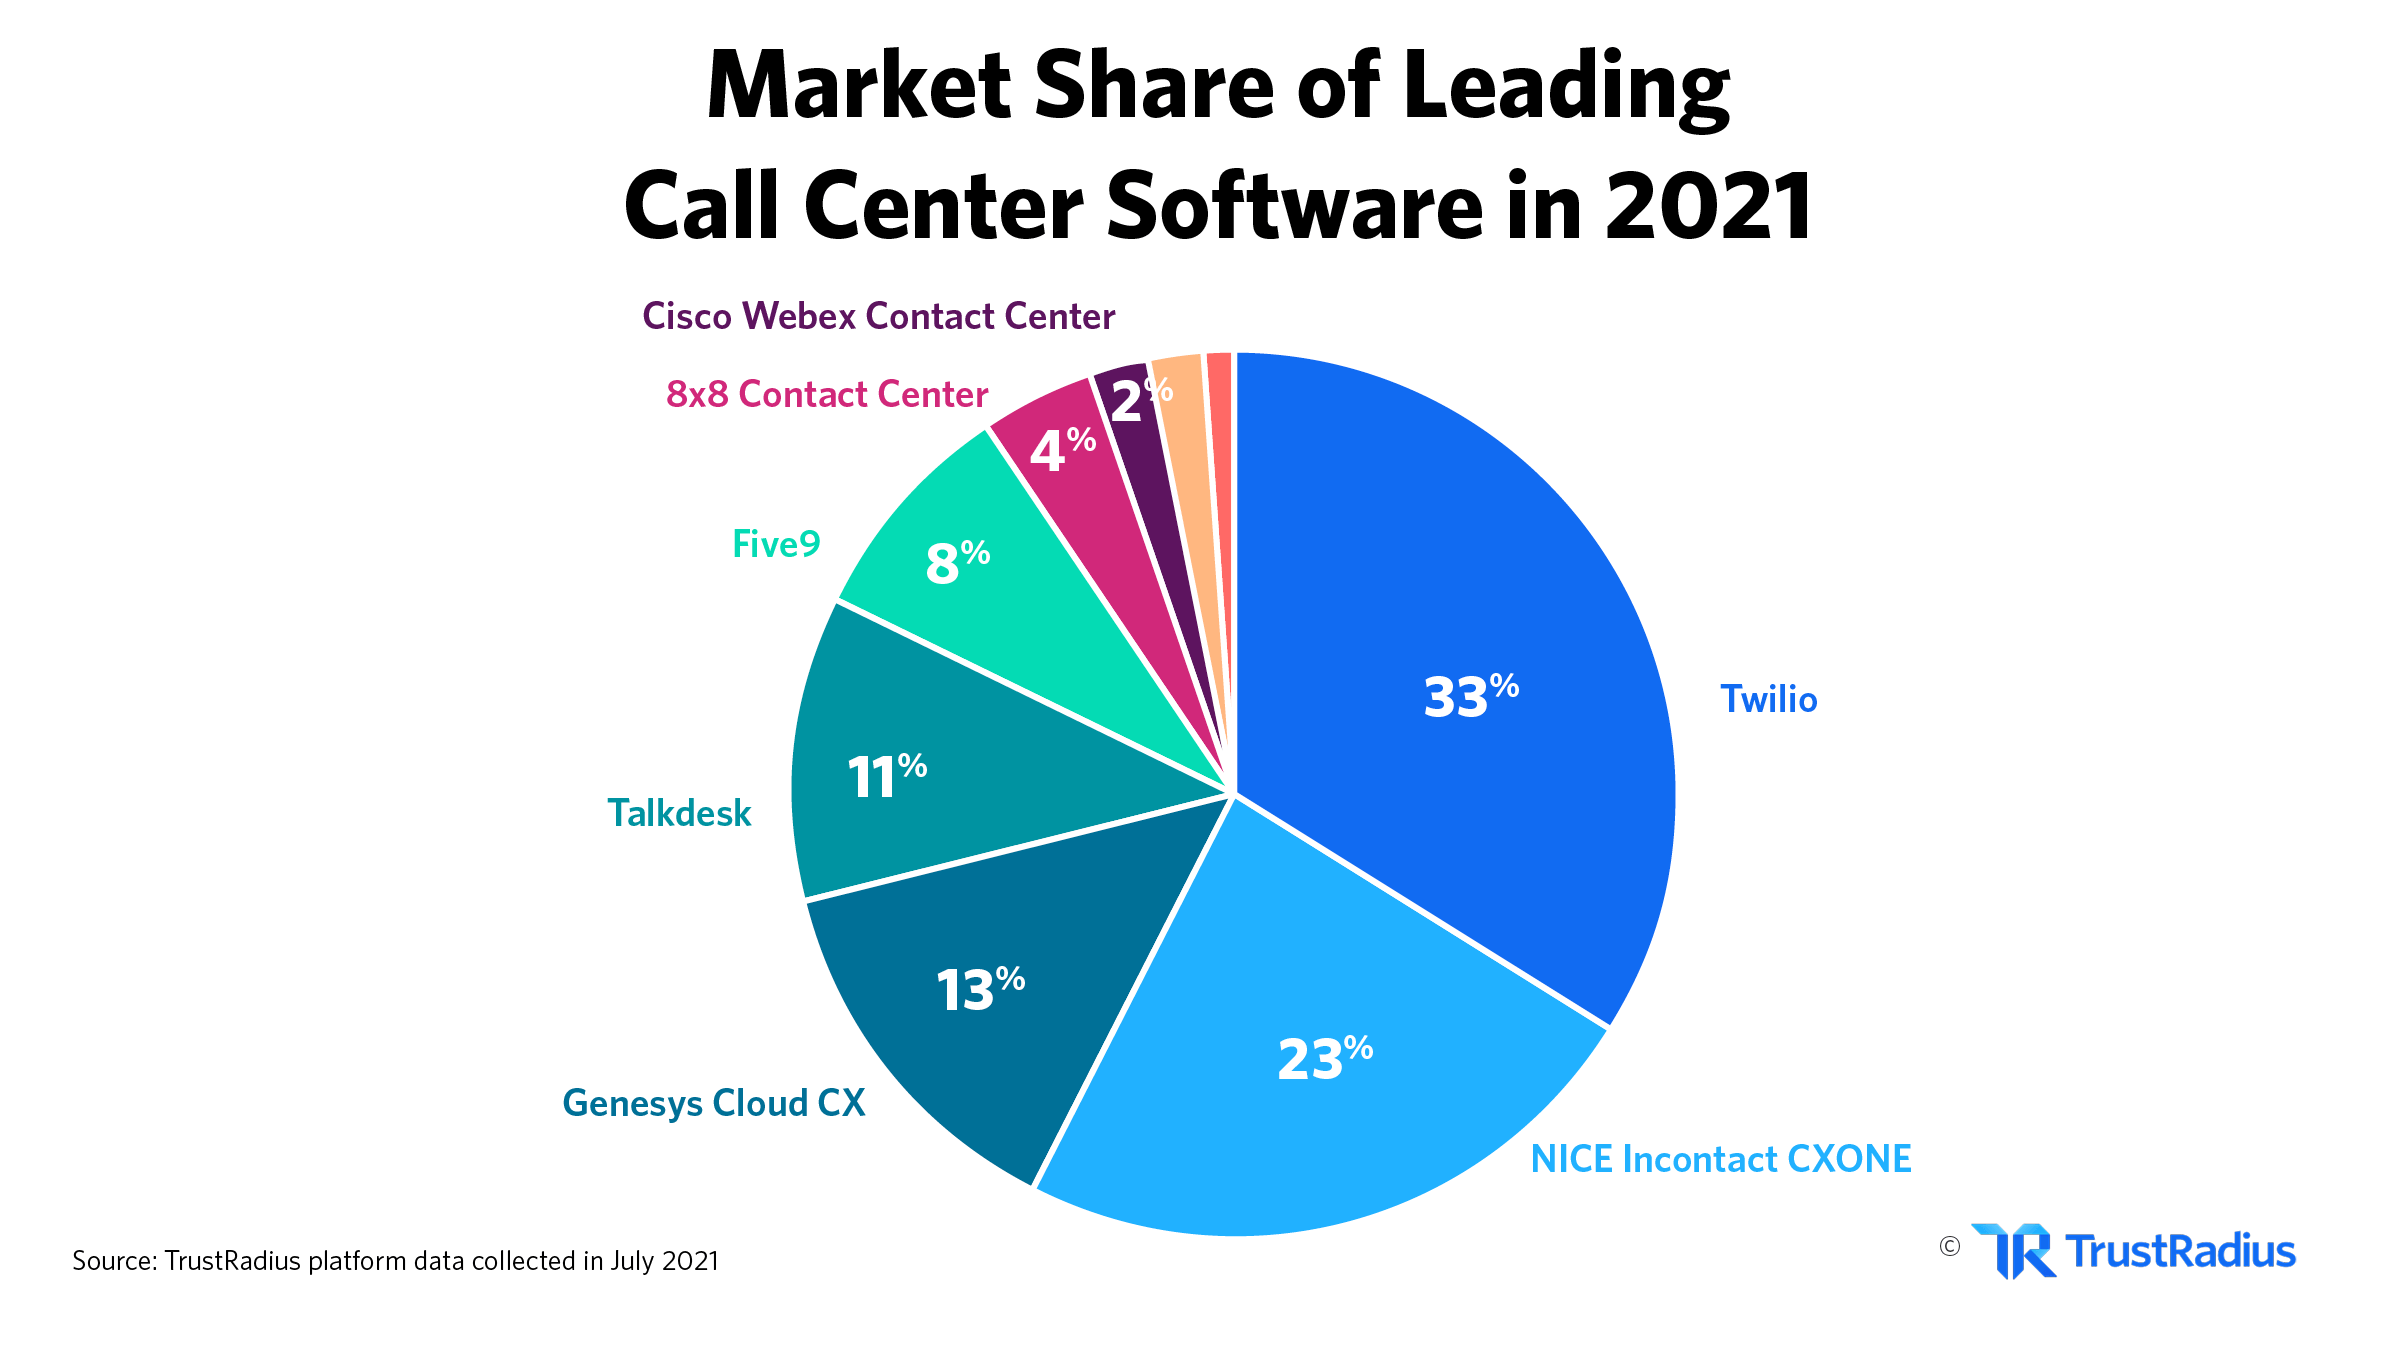 Market share of leading call center software in 2021